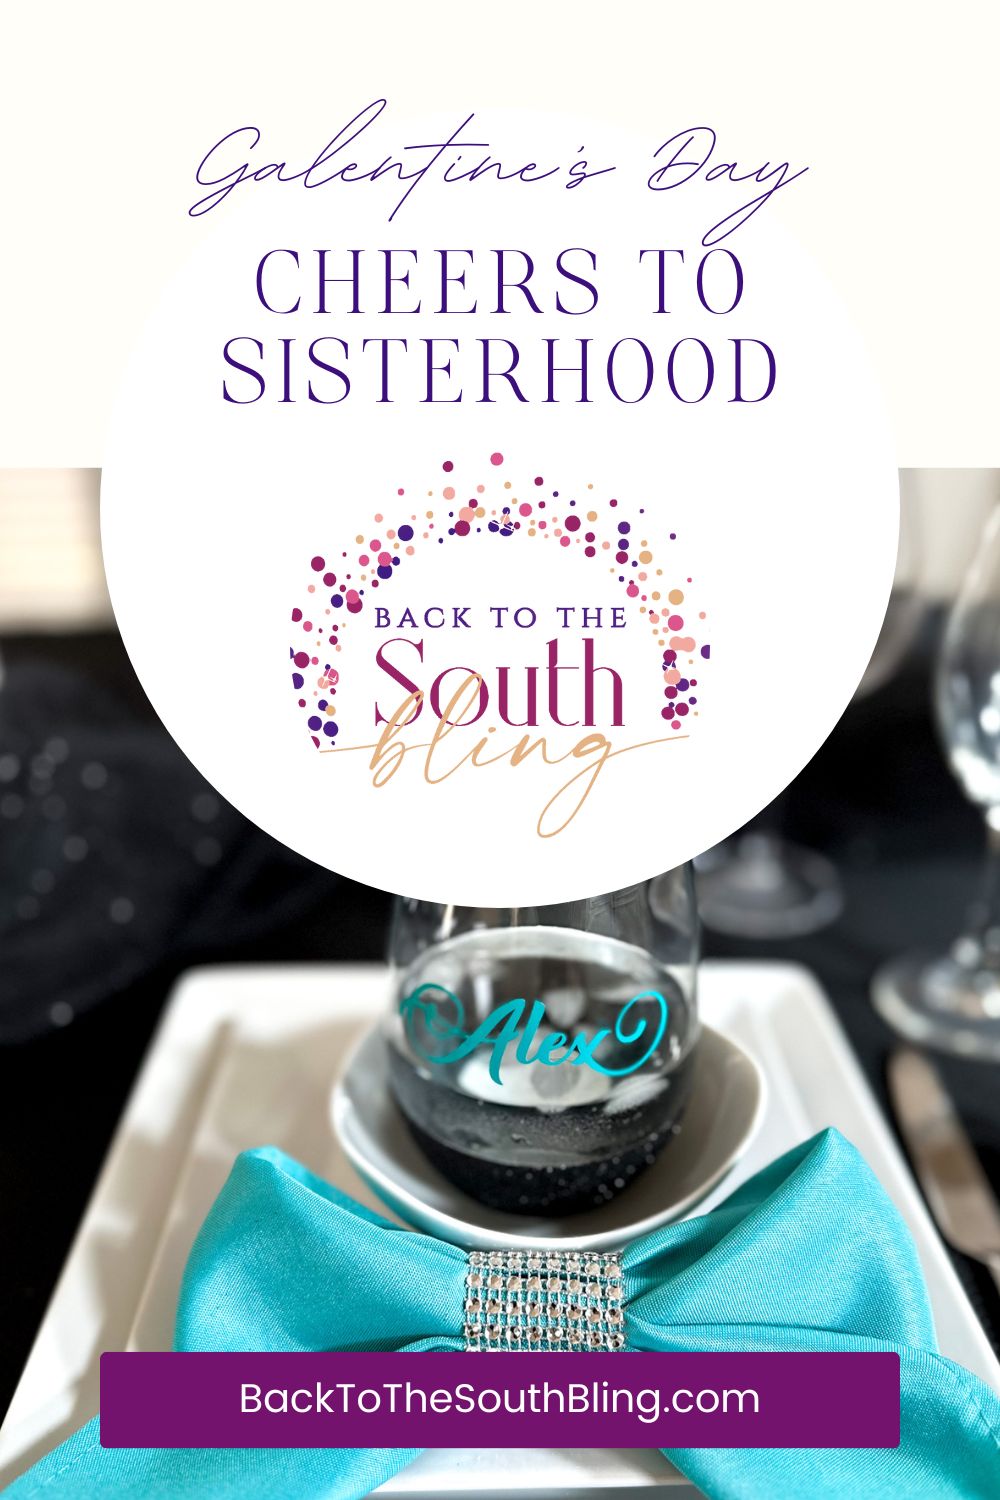 Cheers to Sisterhood: Celebrating Galentine's Day with Glitter-Dipped Elegance